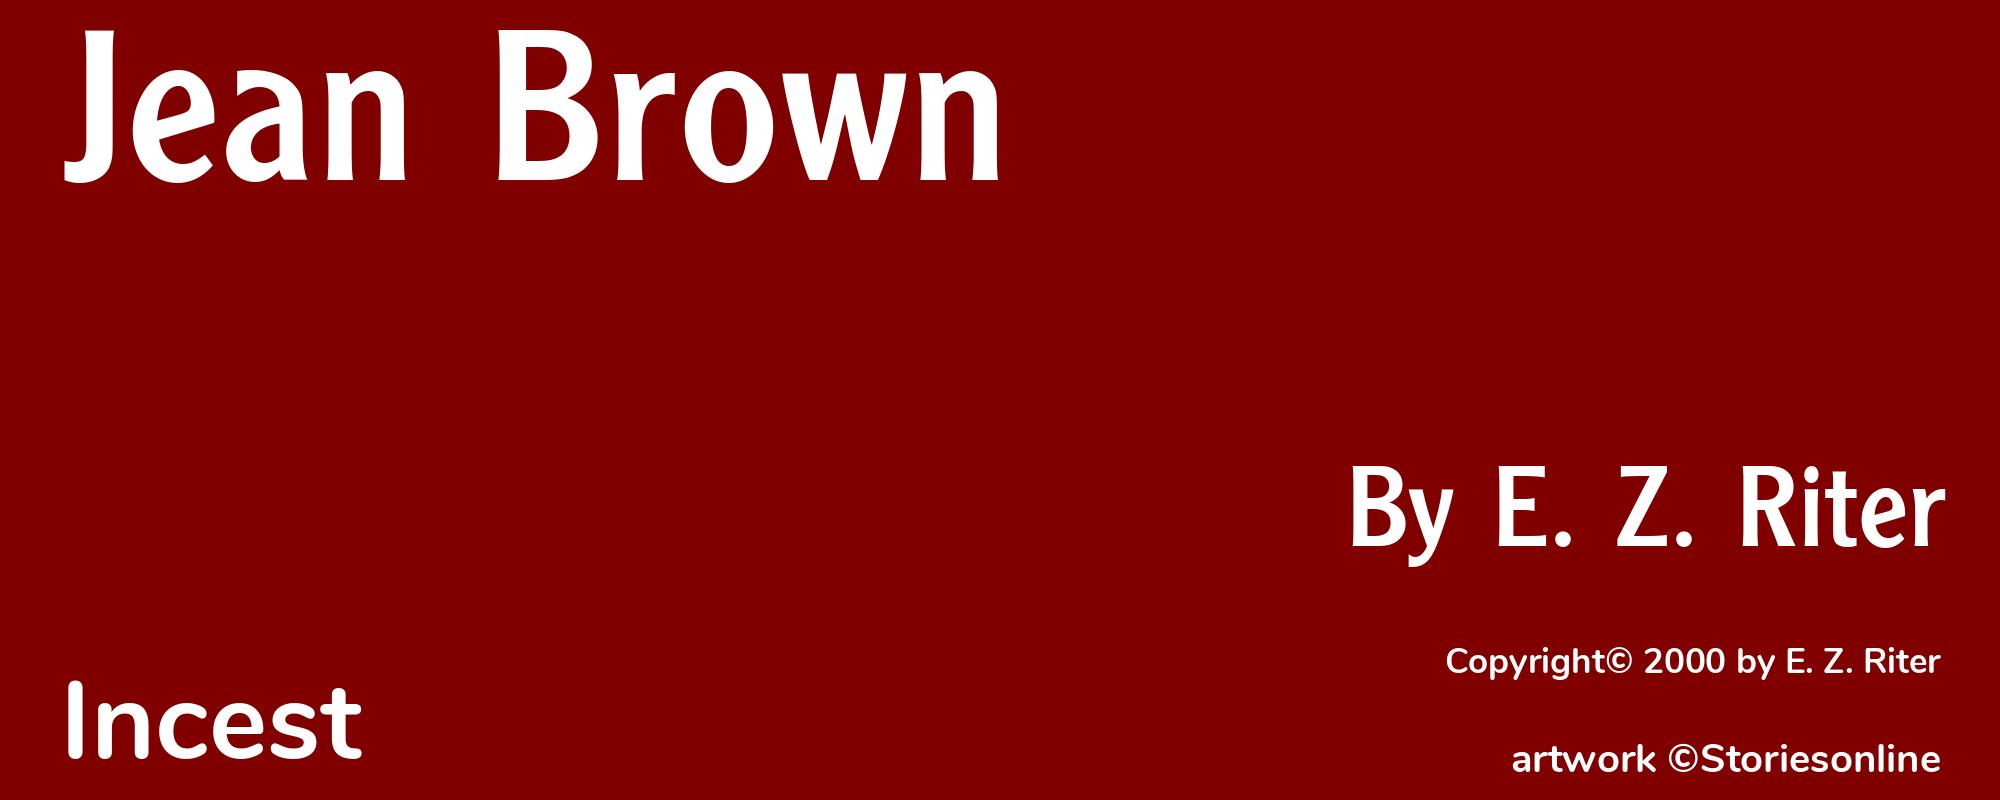 Jean Brown - Cover